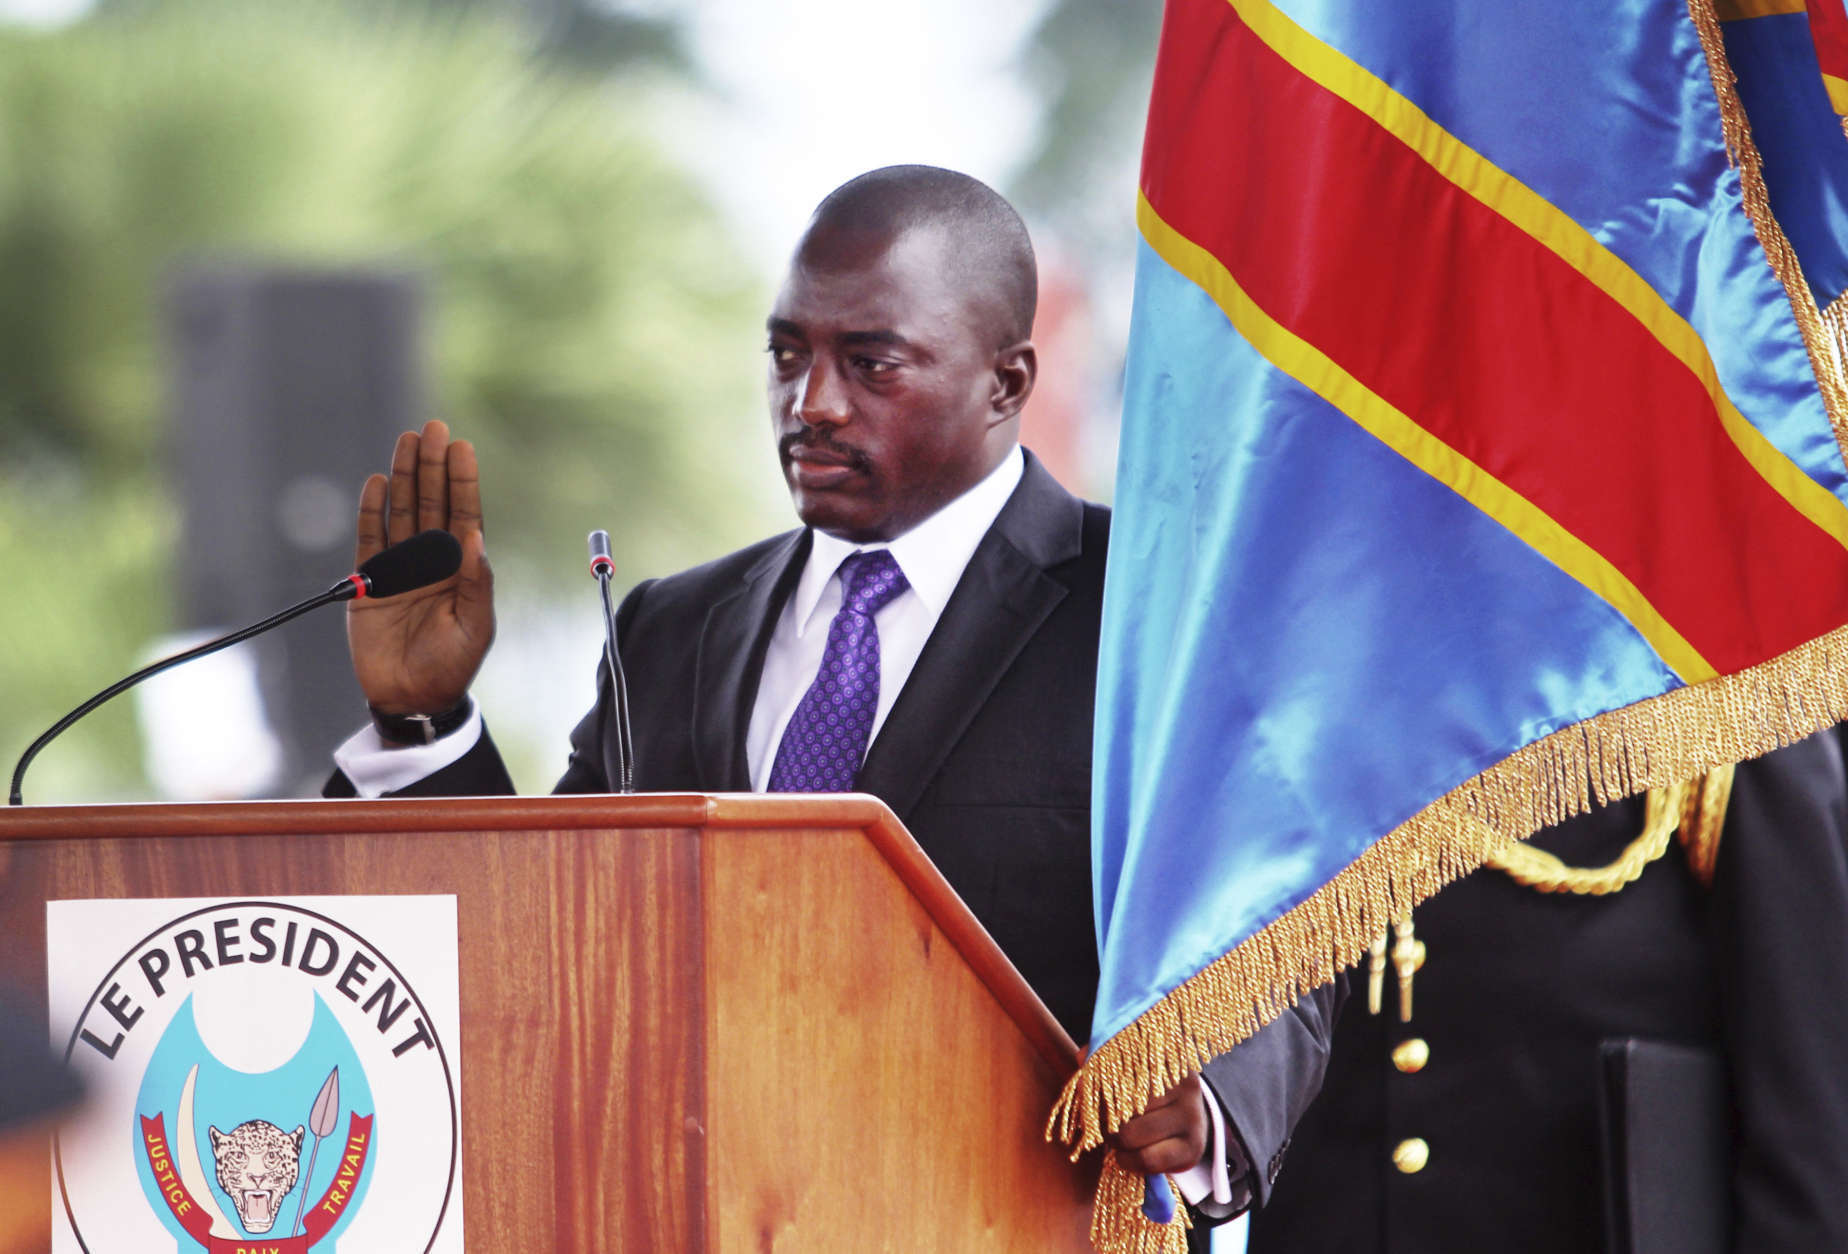 Incumbent Congo President Joseph Kabila holds the Congolese flag as he takes the oath of office as he is sworn in for another term, in Kinshasa, Congo Tuesday, Dec. 20, 2011. The president of sub-Saharan Africa's largest nation pledged to unify the country after an election that was criticized by international observers. The country's top opposition candidate, meanwhile, planned his own inauguration in a move that could spark political chaos. (AP Photo/John Bompengo)